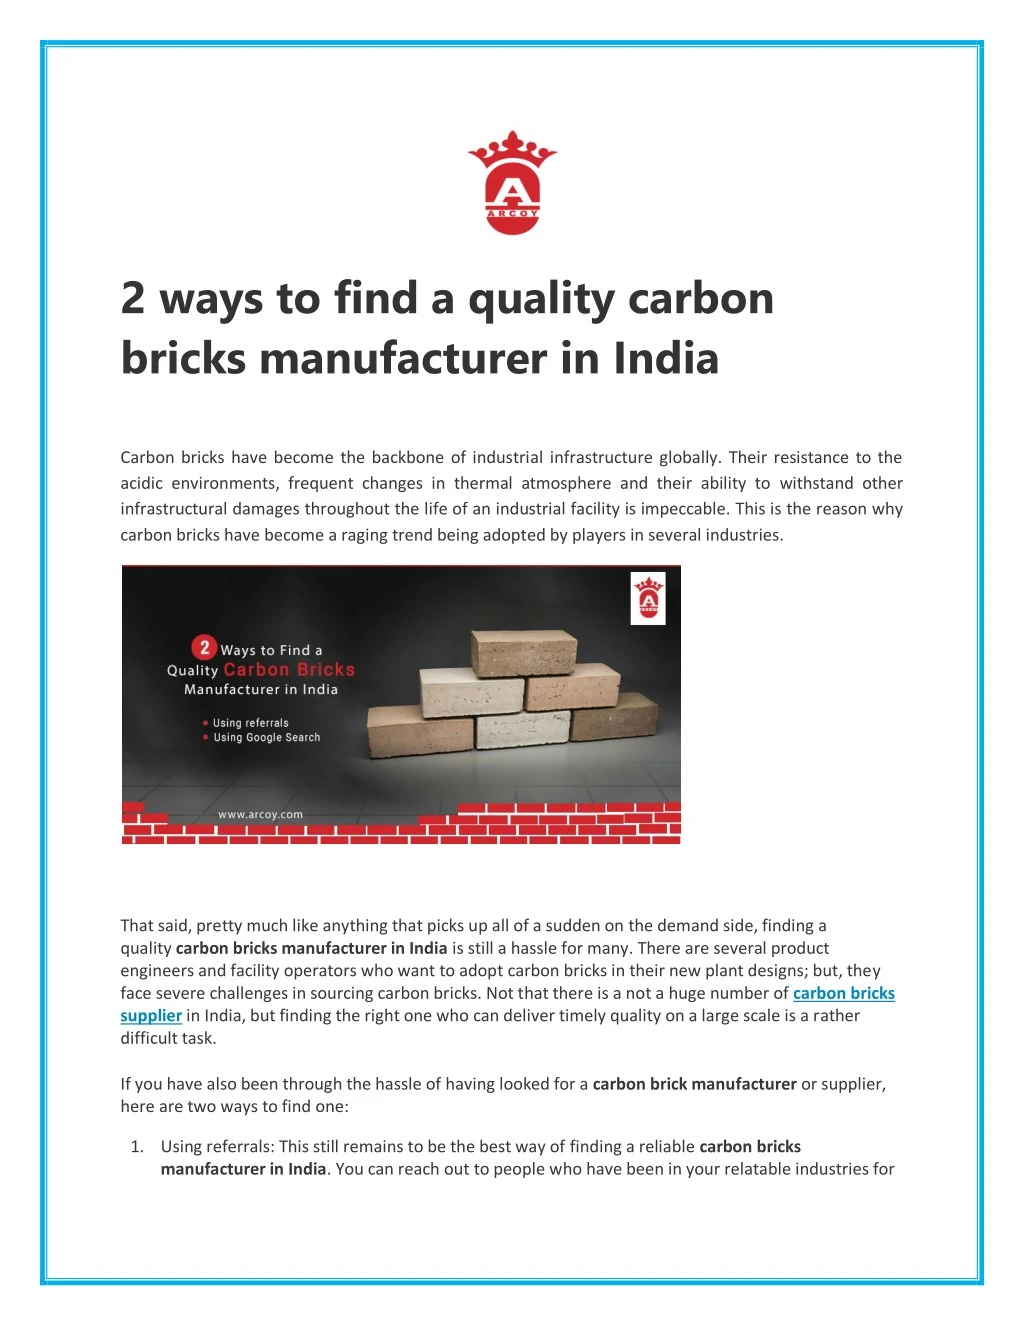 2 ways to find a quality carbon bricks